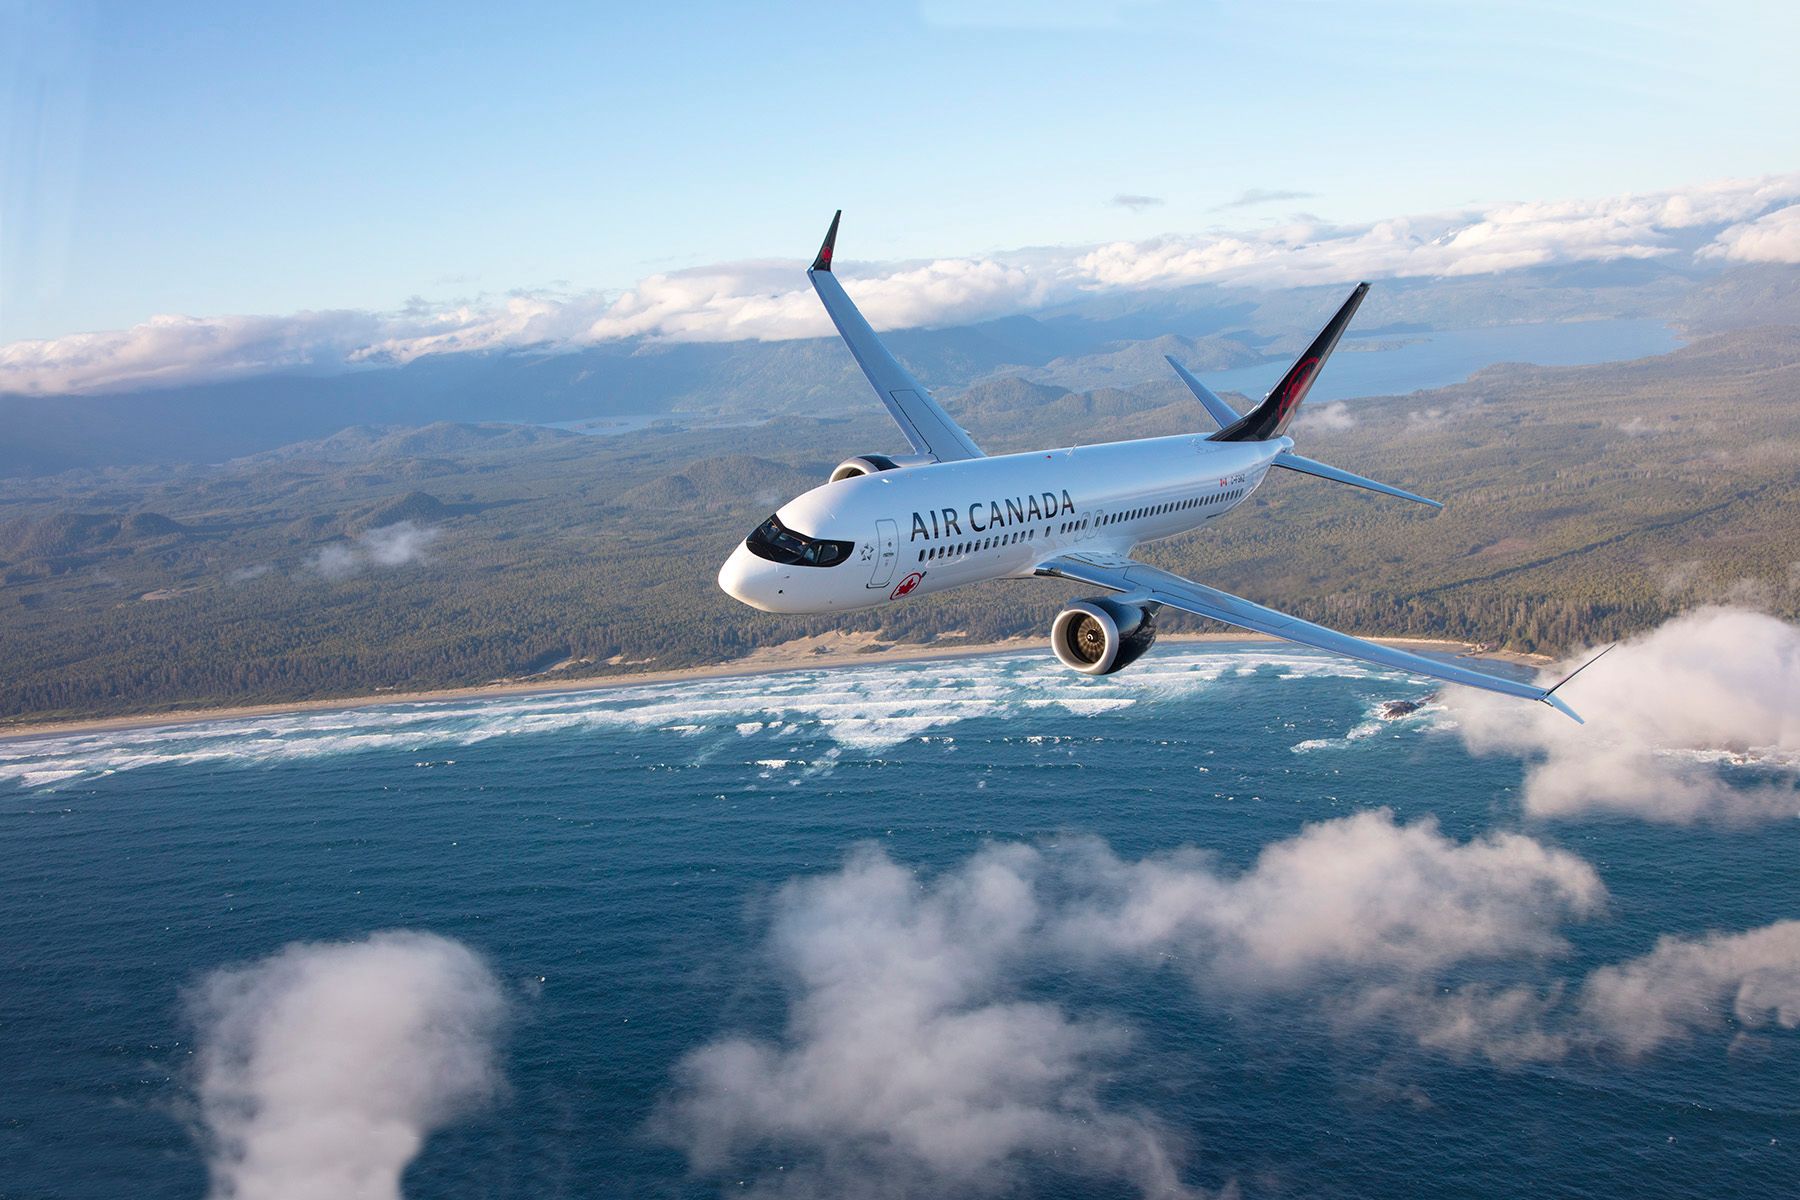 The final Boeing 737 Max was delivered to Air Canada from an order of 40 aircraft